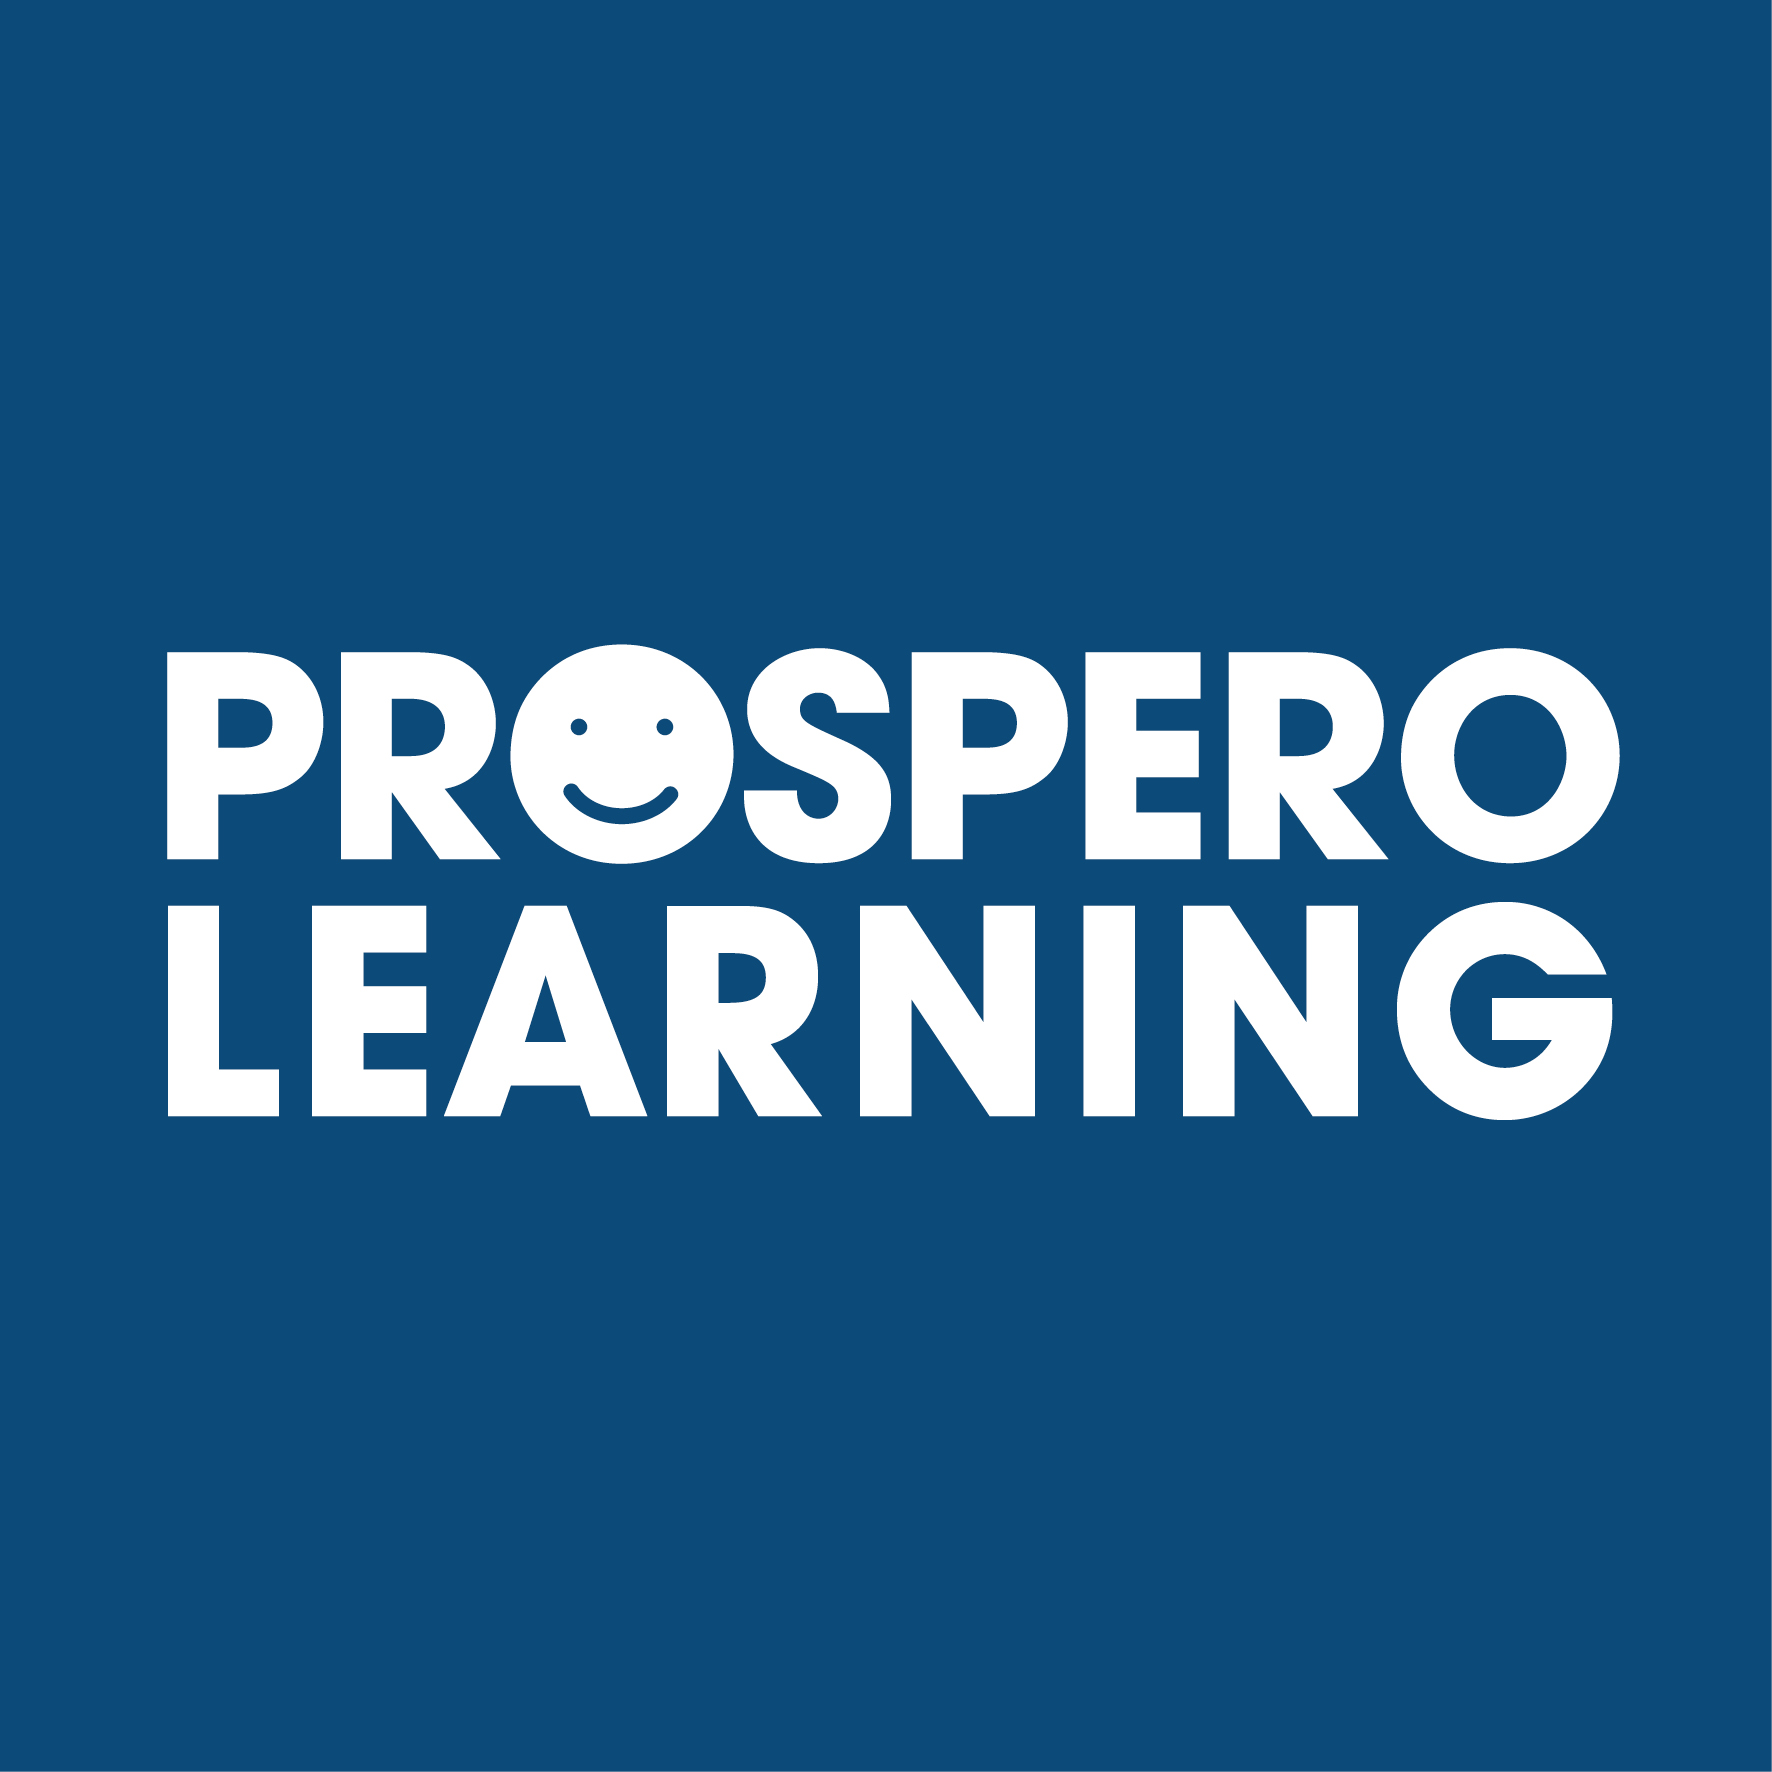 About Prospero Learning